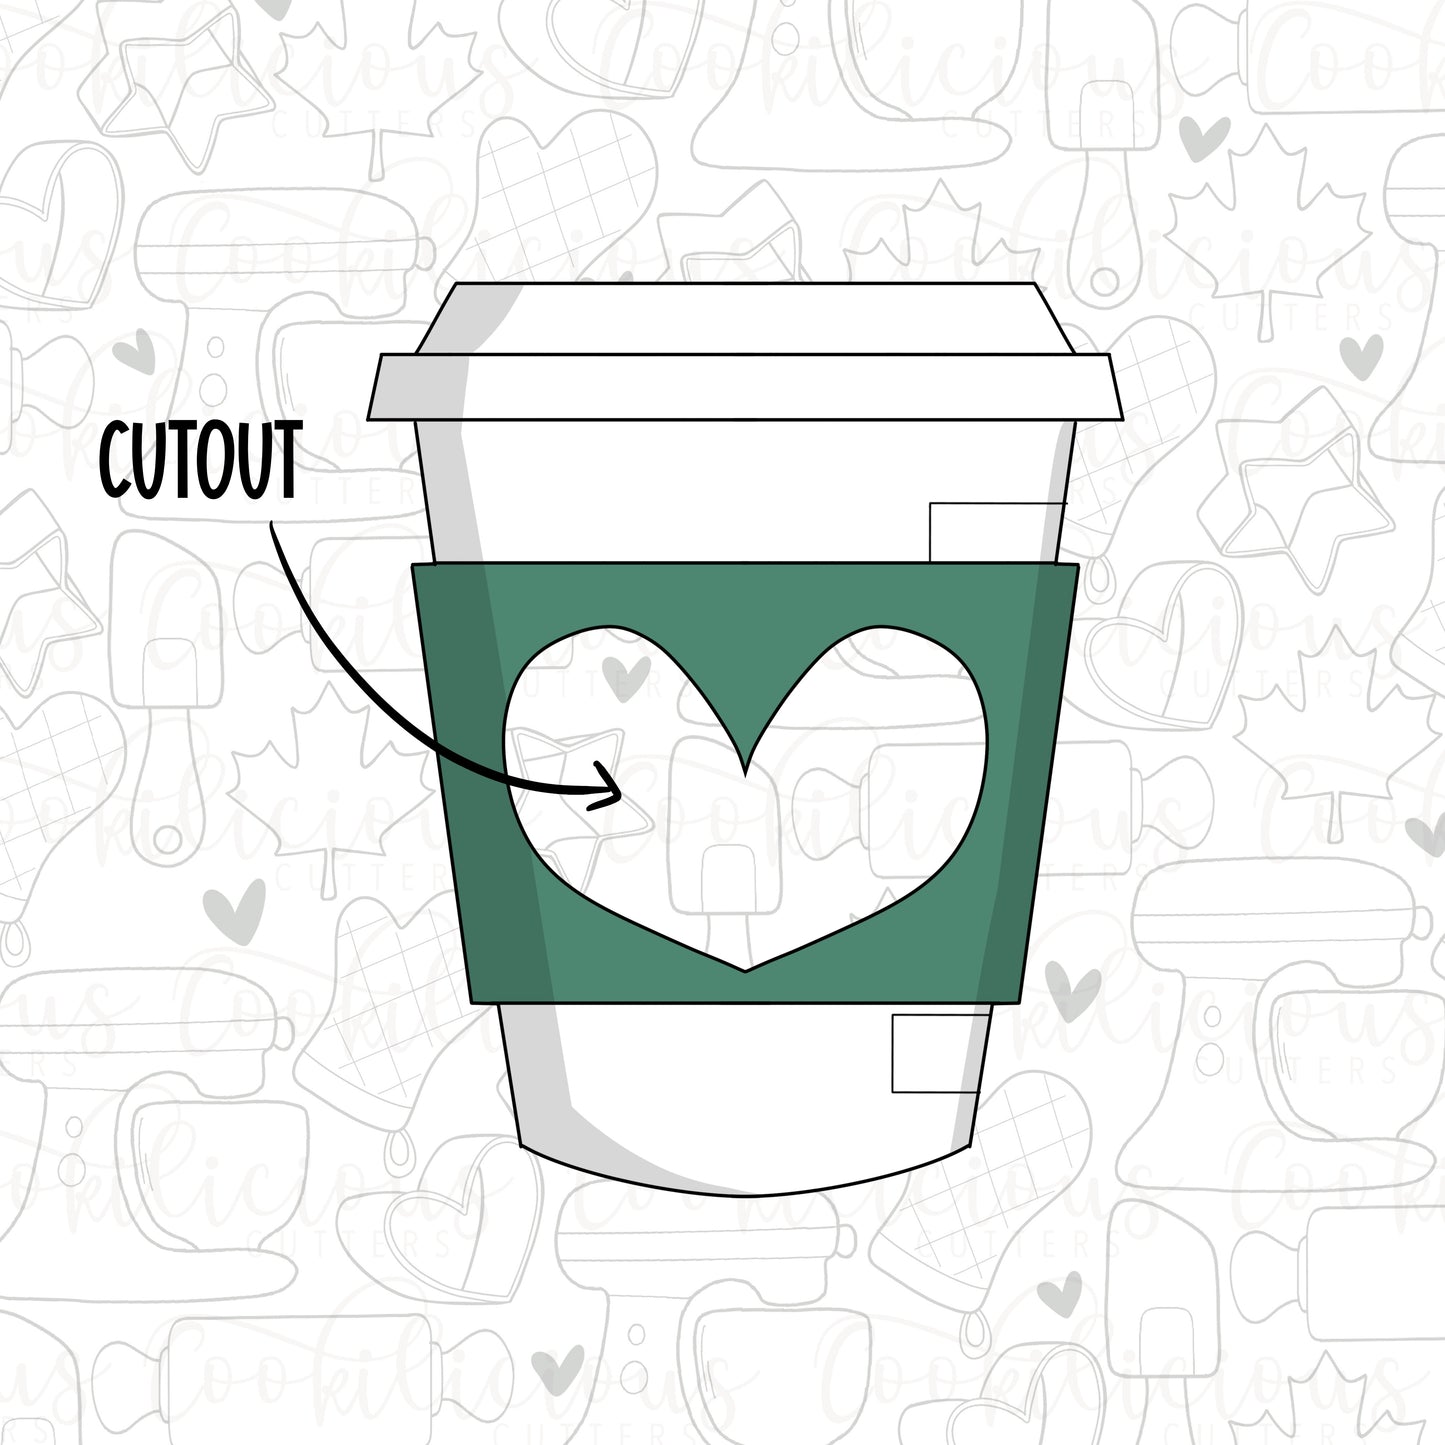 Coffee with Heart Cutout